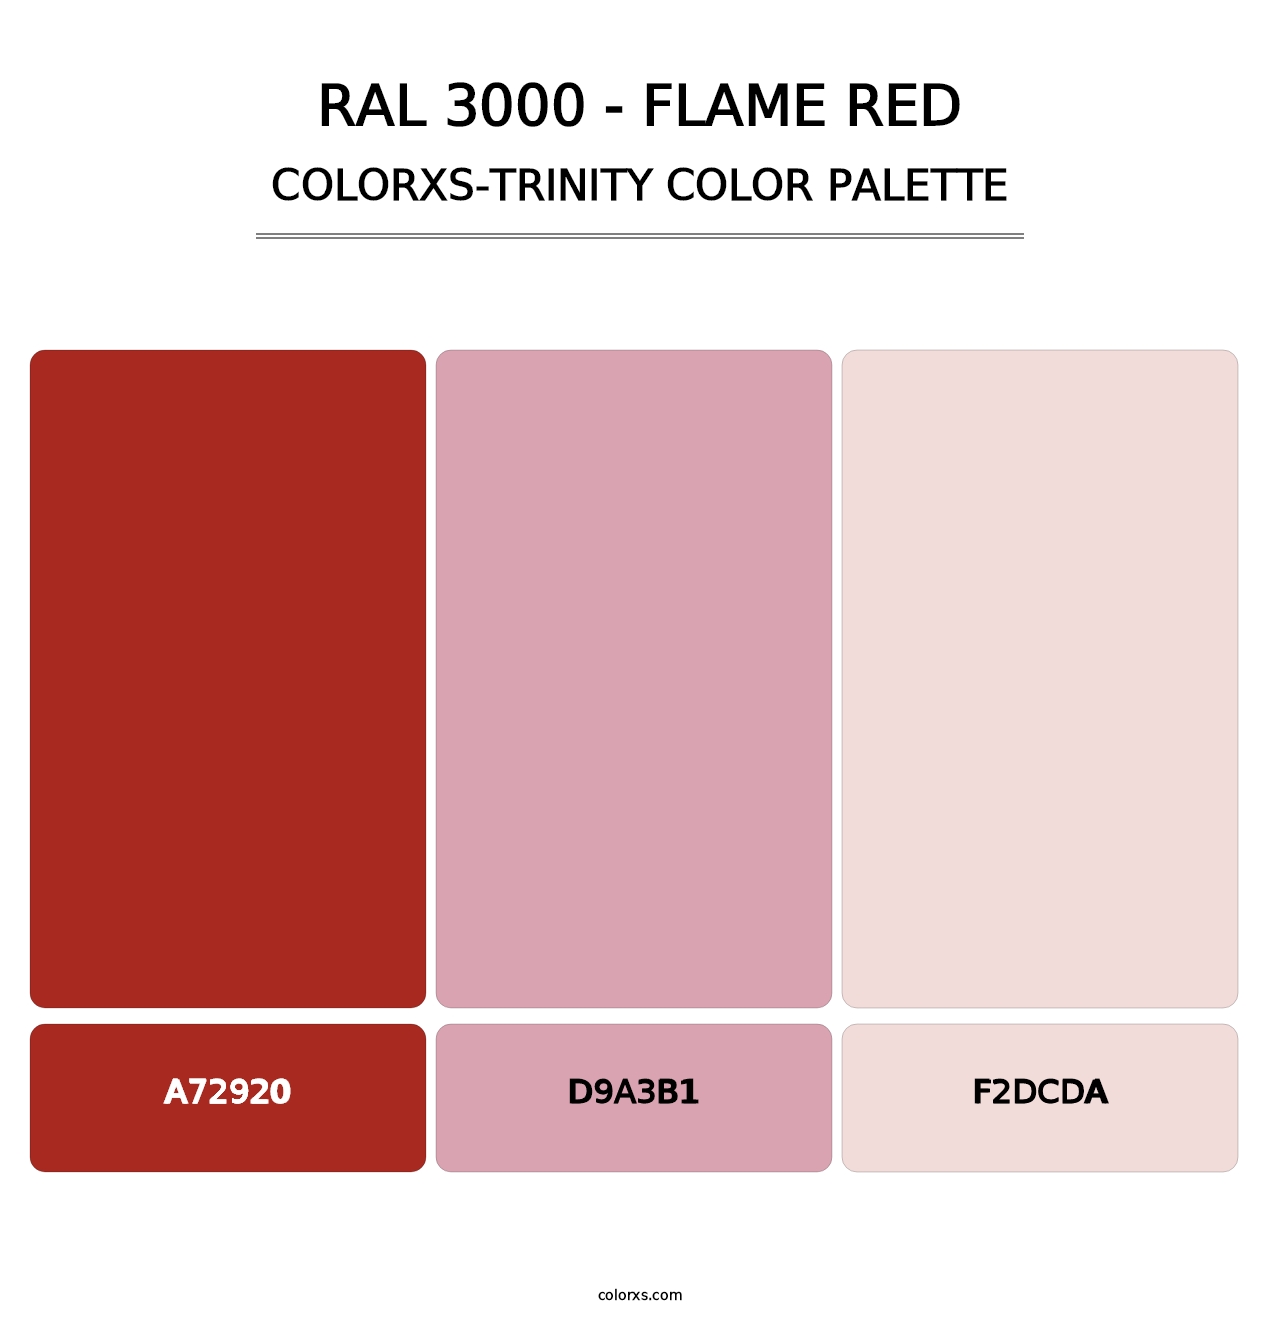 RAL 3000 - Flame Red - Colorxs Trinity Palette